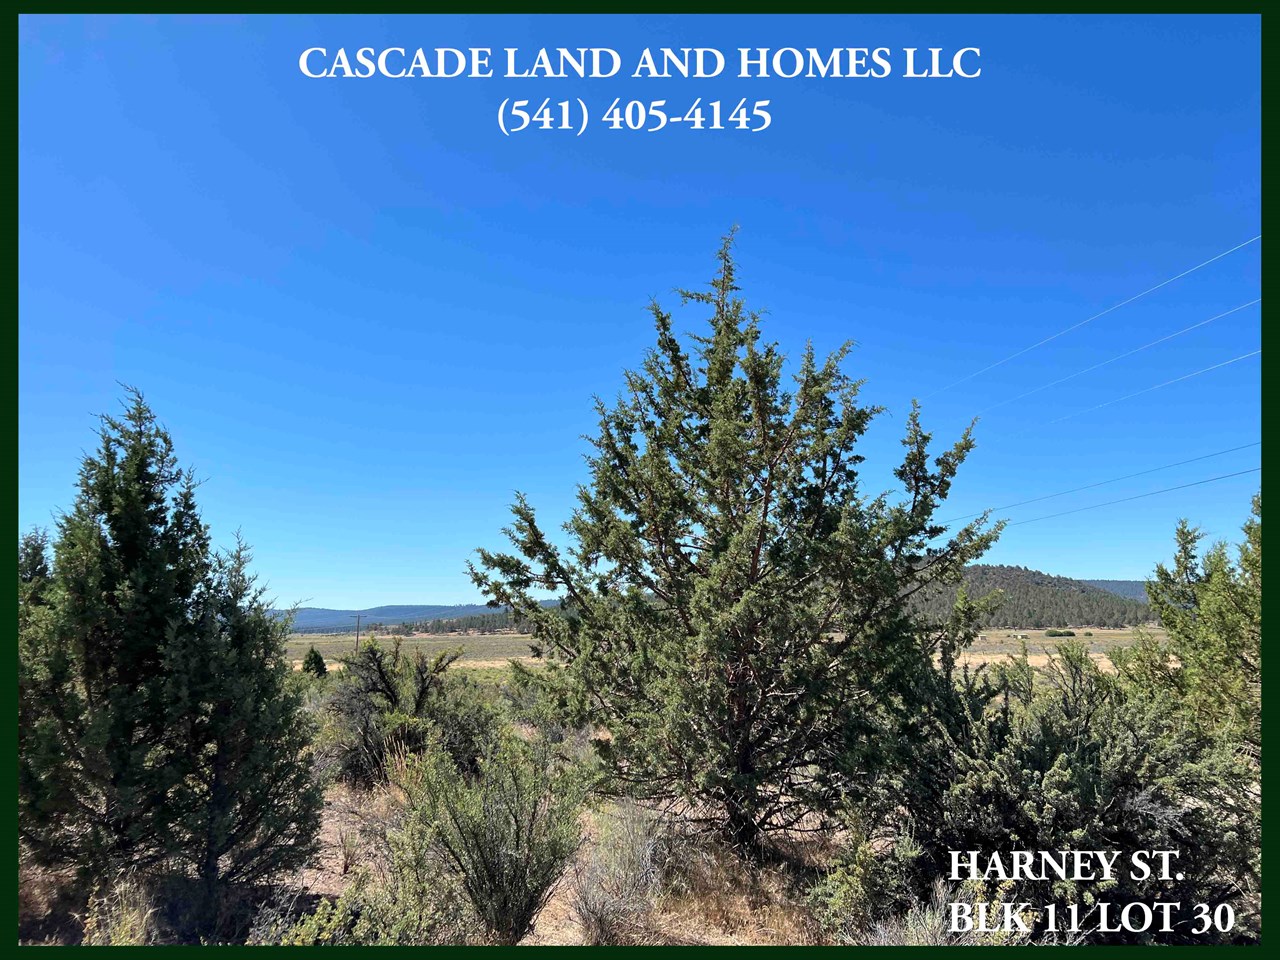 large, 1.53~acre parcel with gorgeous views! the property has a few trees, mostly juniper, and native shrubs and grasses. it slopes gently uphill from the road allowing for amazing views of the sprague river valley! the property is just a few hundred feet of off paved, drews road for easy access. the property would need a well and septic, and power is across the street. modular homes are allowed here. this property also has possibilities for off-grid living, check with local jurisdictions on viability of your plans. just a short walk to the sprague river!